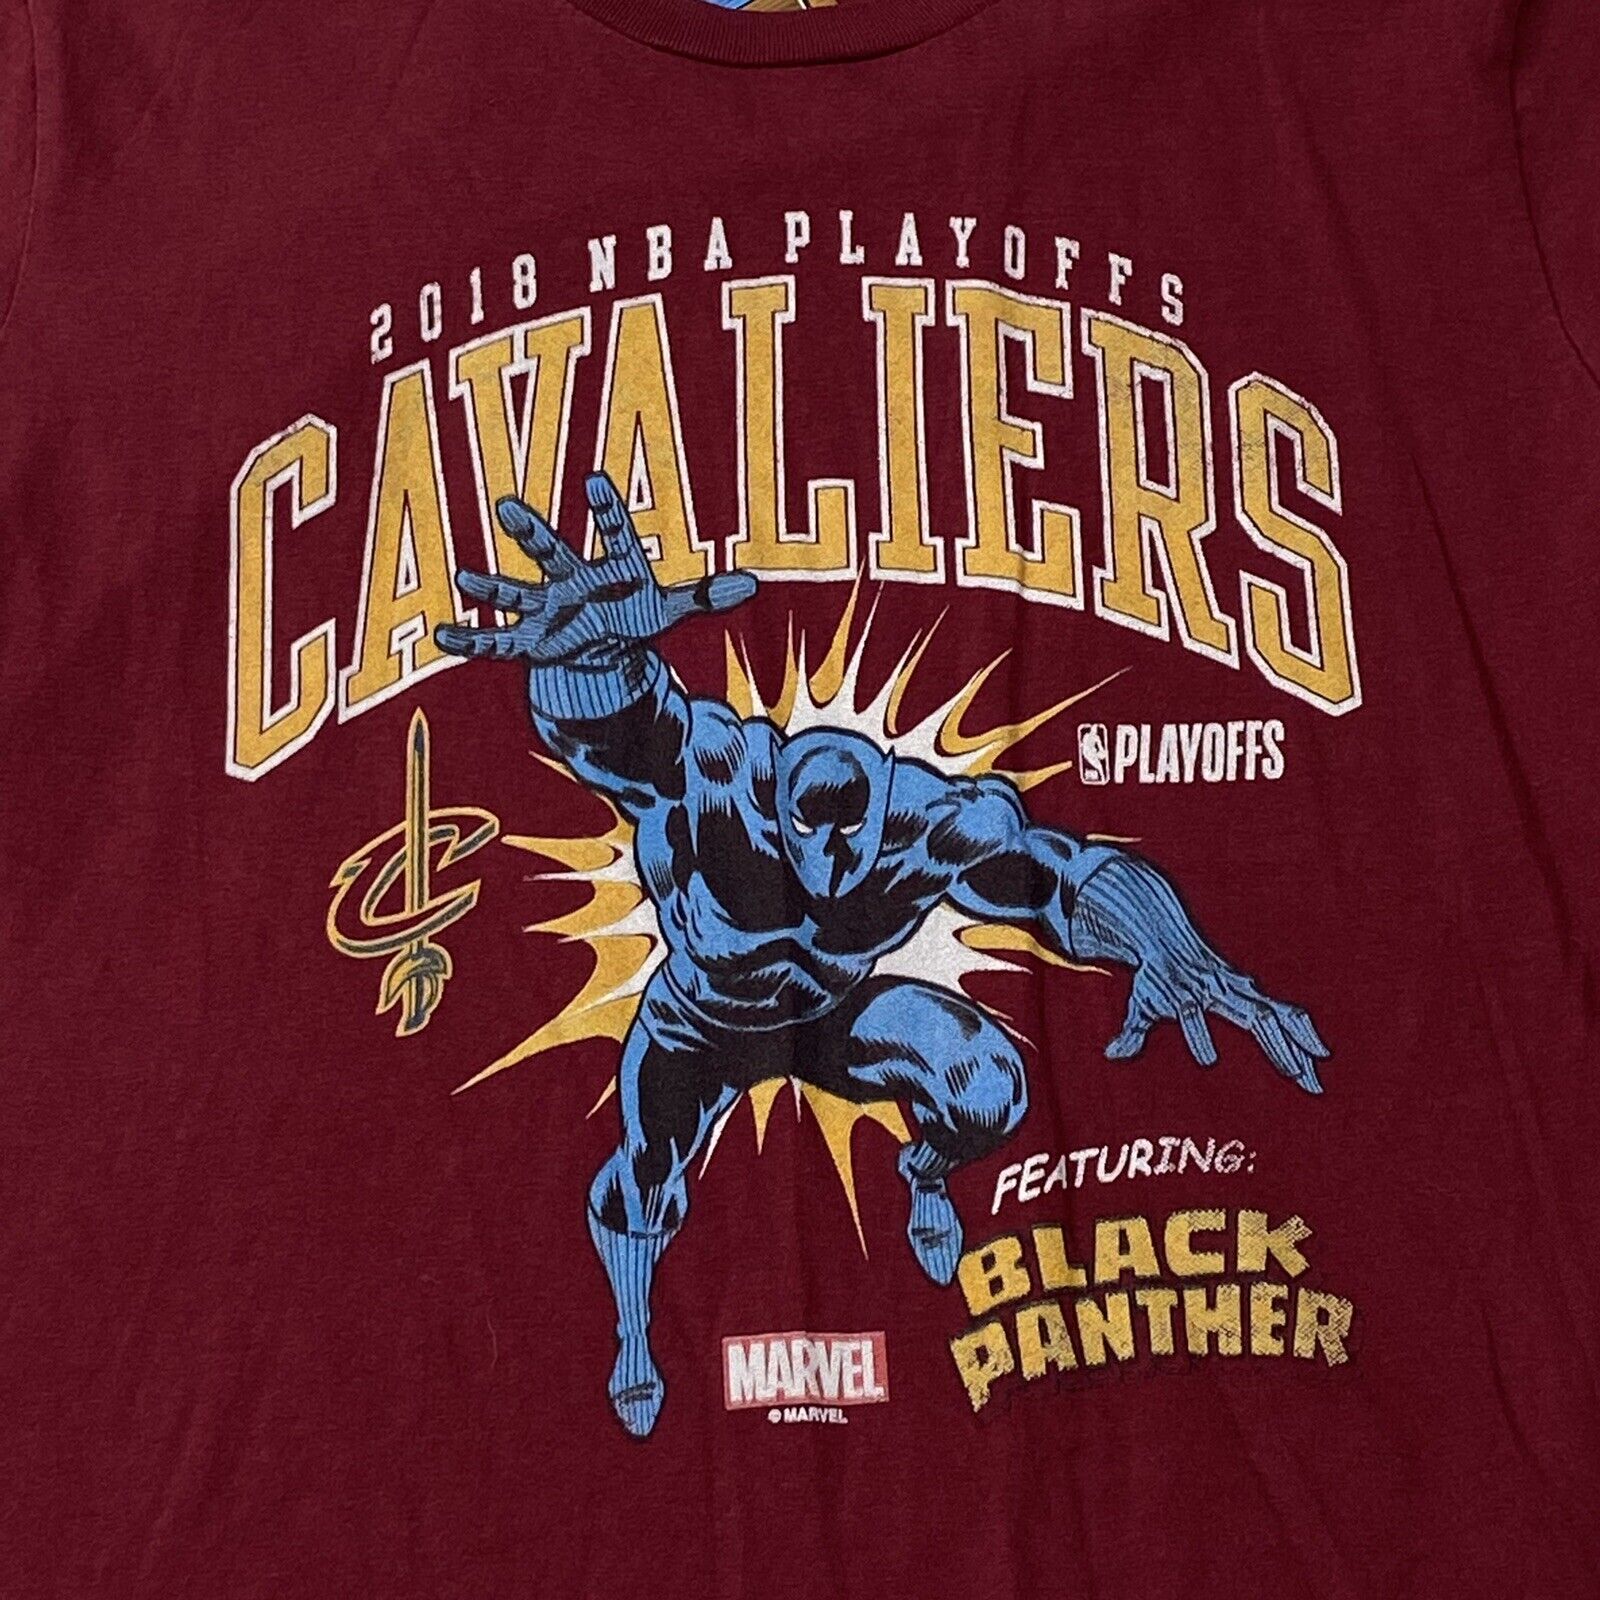 youth cavaliers shirt